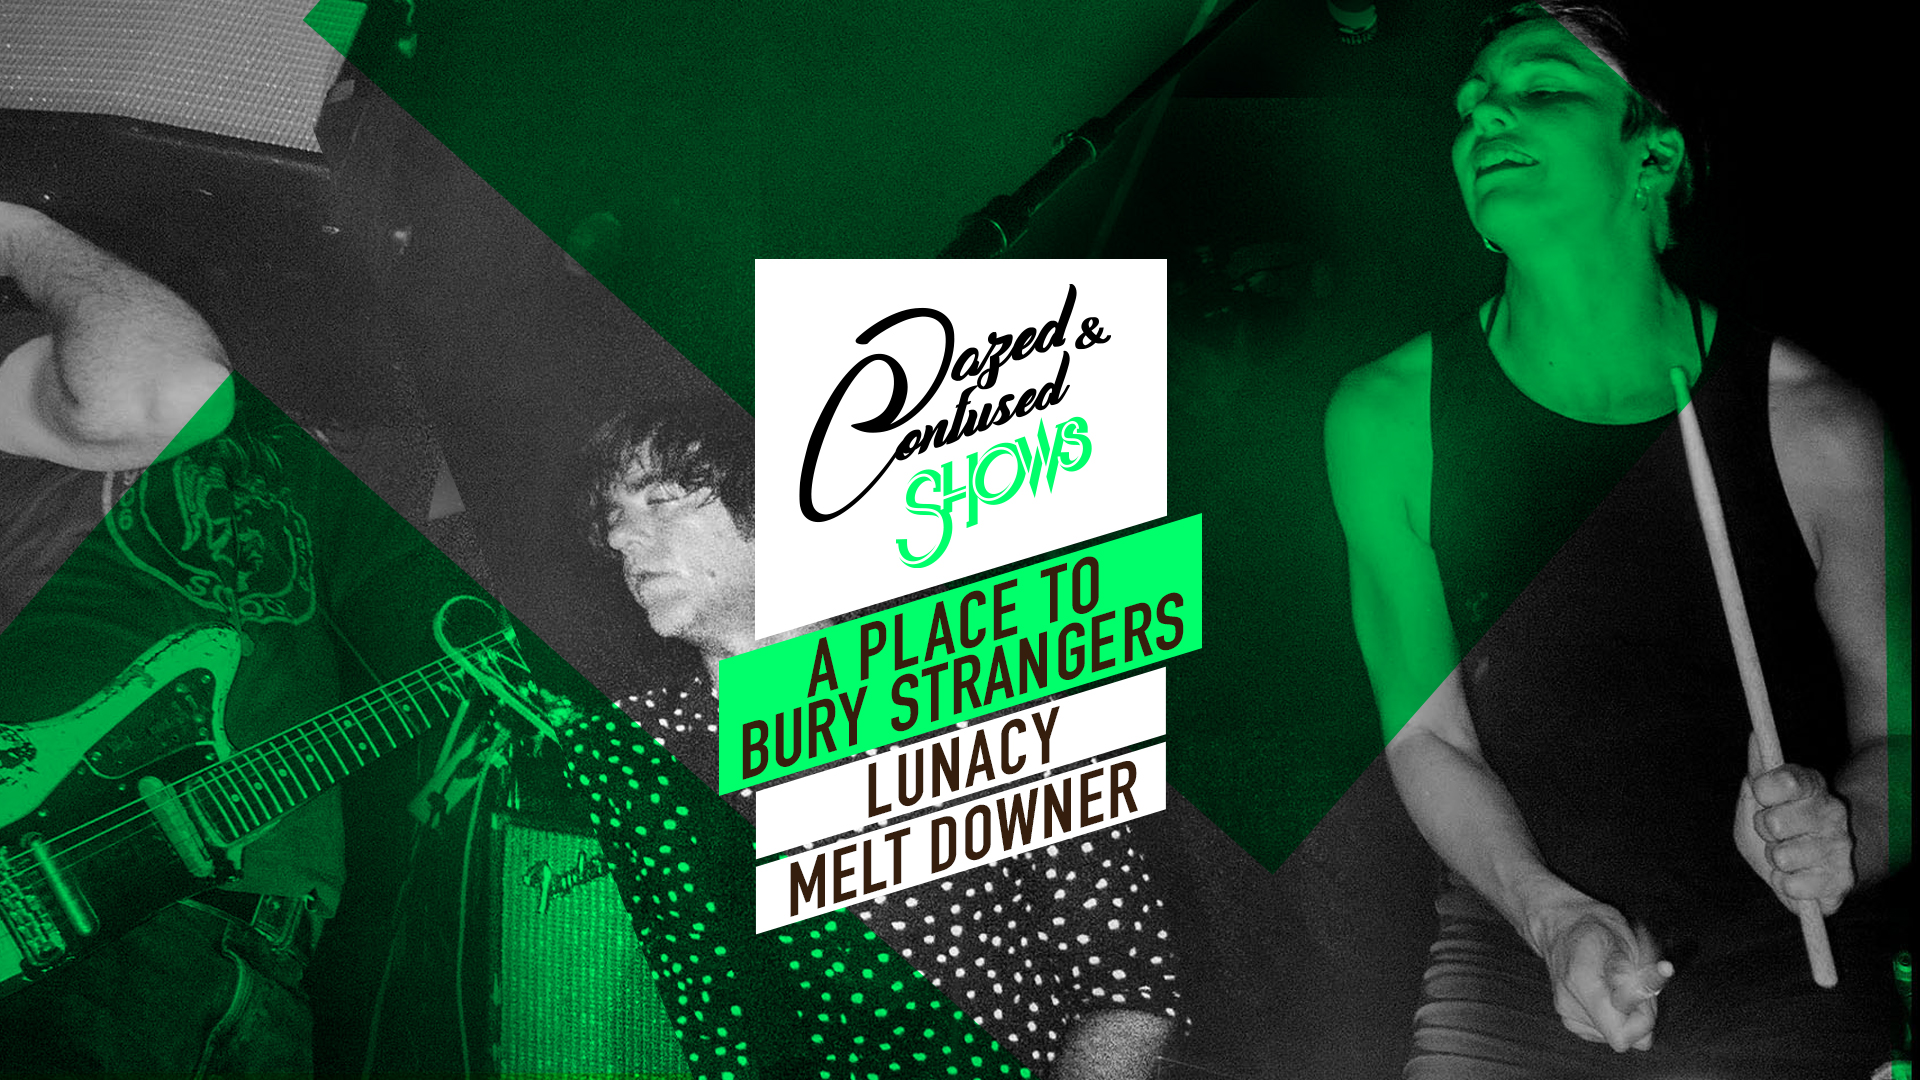 A Place To Bury Strangers / Lunacy / Melt Downer am 31. May 2023 @ Fluc.